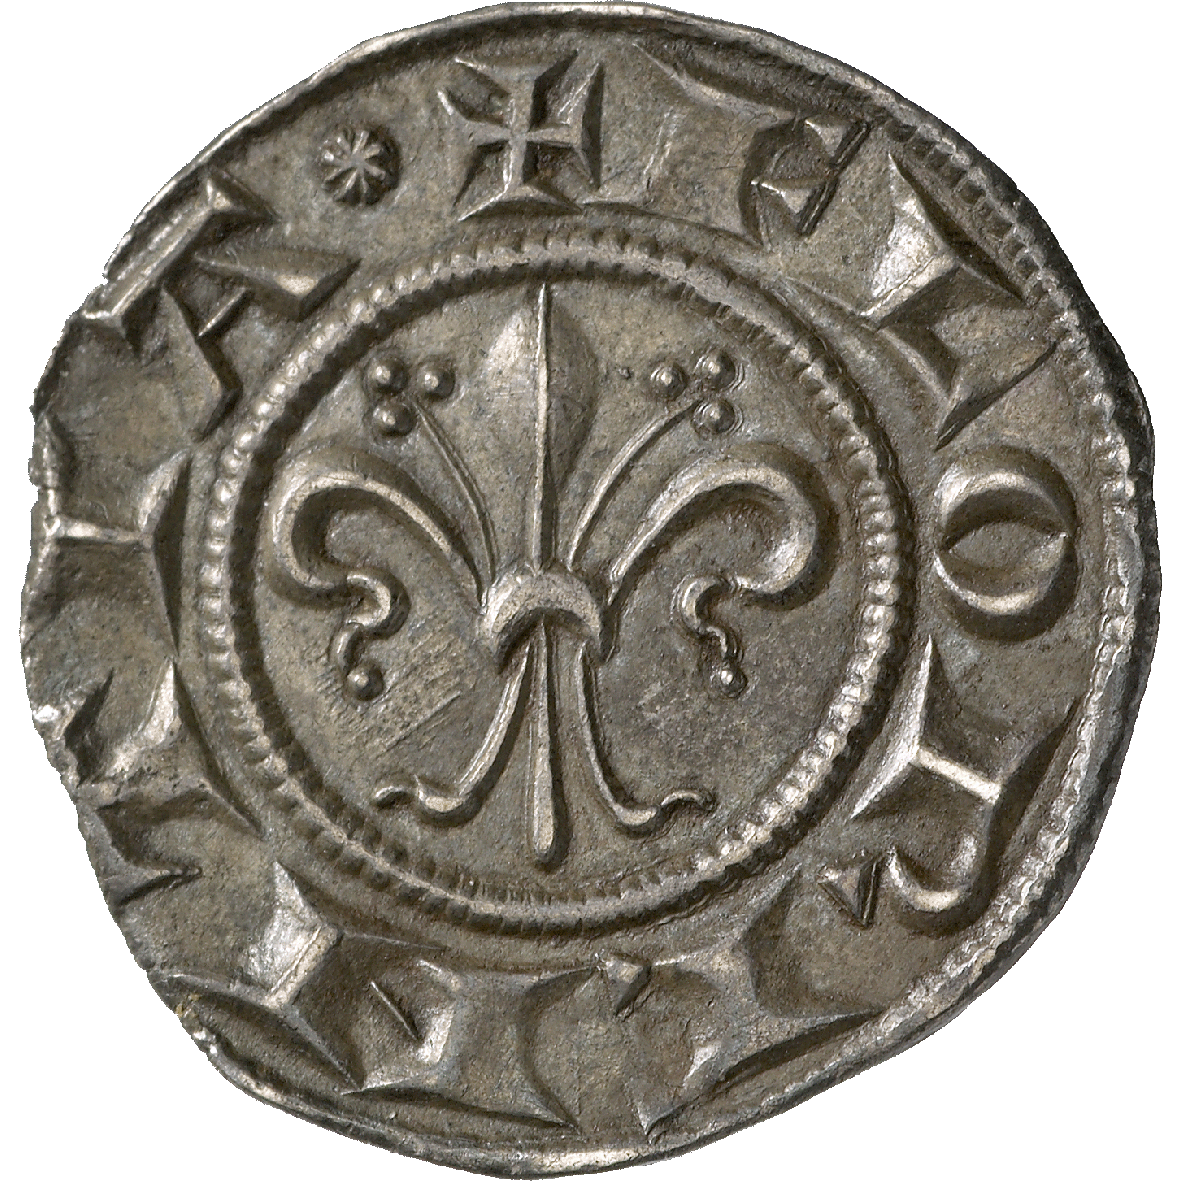 Holy Roman Empire, Republic of Florence, Fiorino d'Argento (Grosso) (obverse)